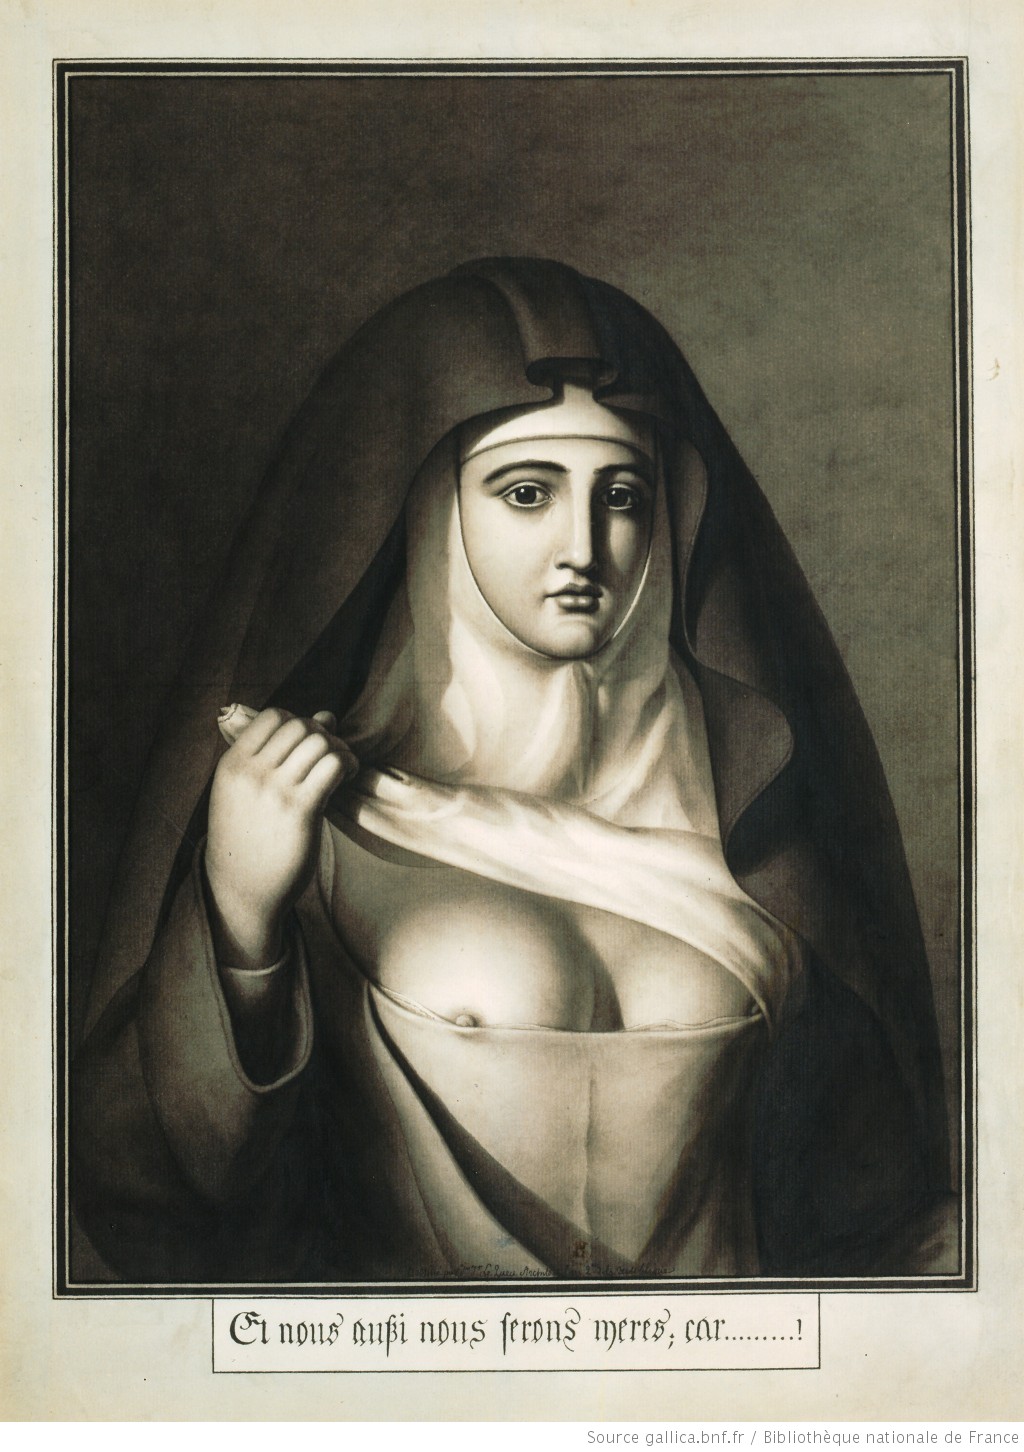 Drawing of a nun showing one of her breasts. 